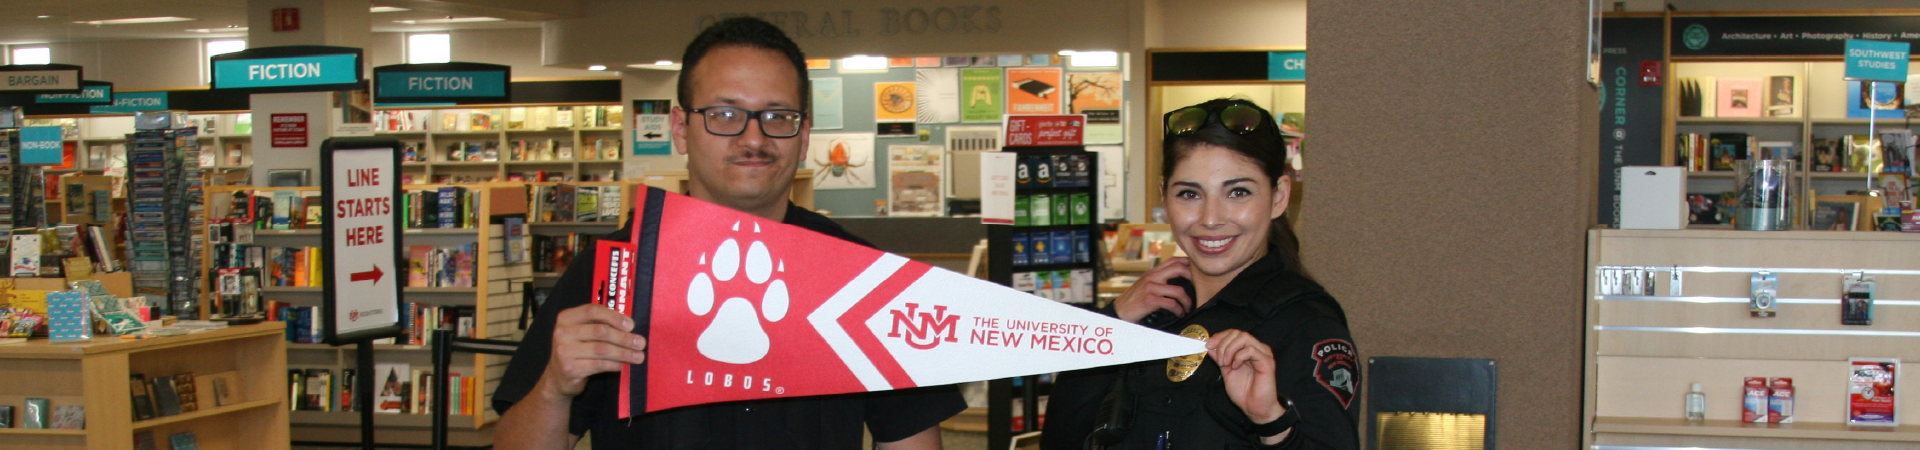 Officers pose with Go Lobos banner inside bookstore